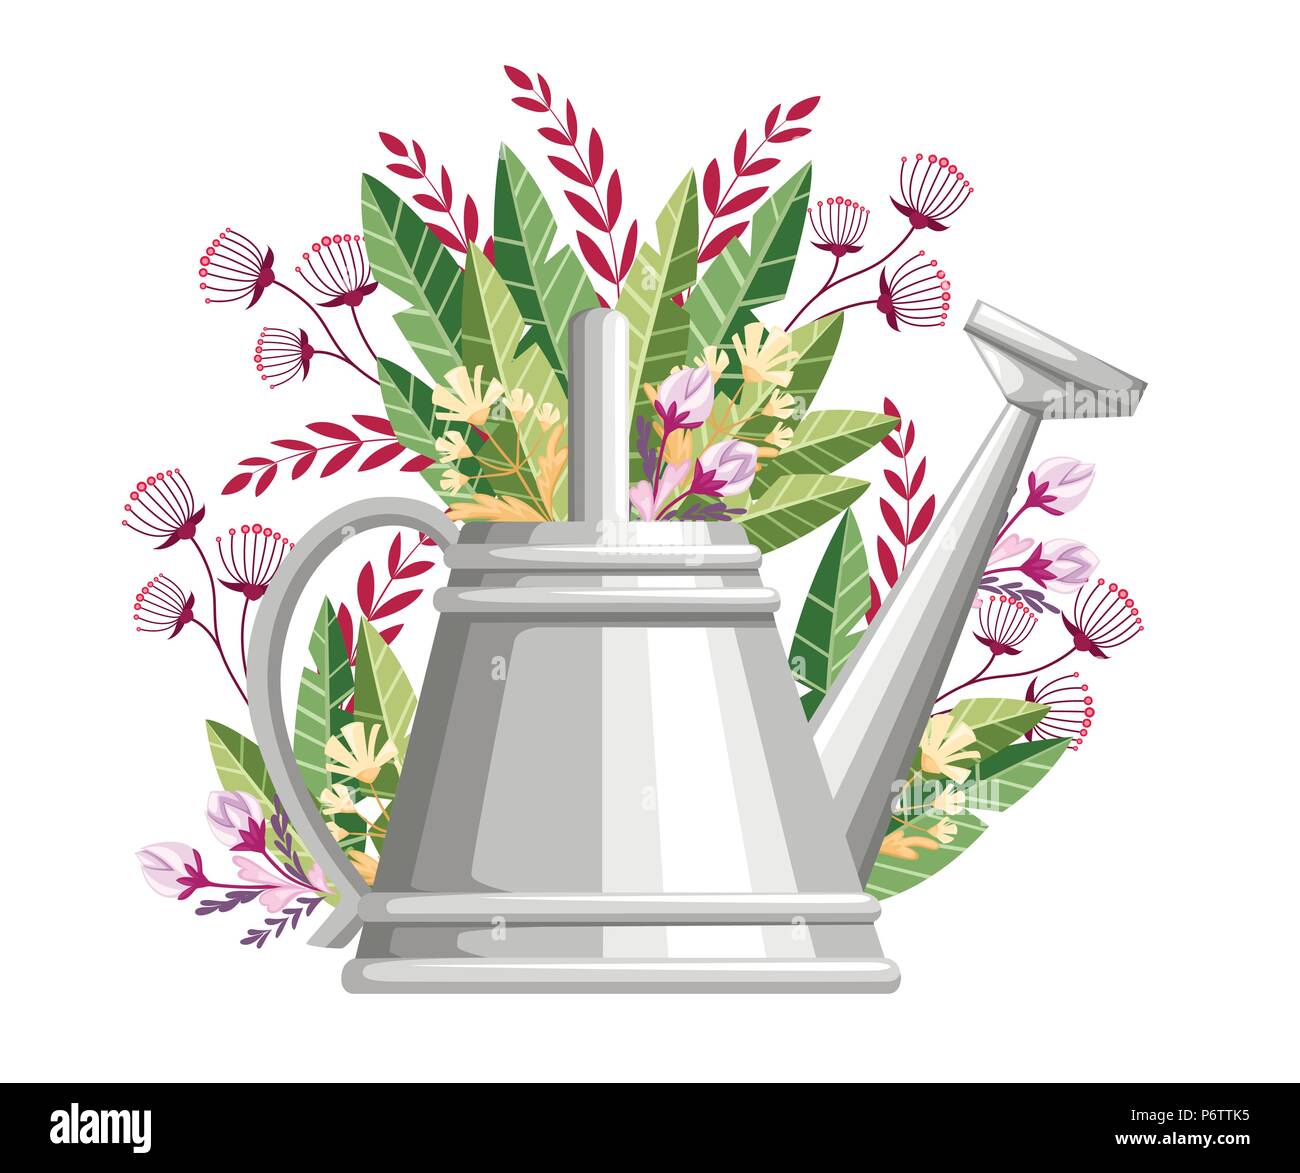 Gardening tool watering can. Metal flower can with green leaves and flowers. Farming equipment flat style. Vector illustration isolated on white backg Stock Vector